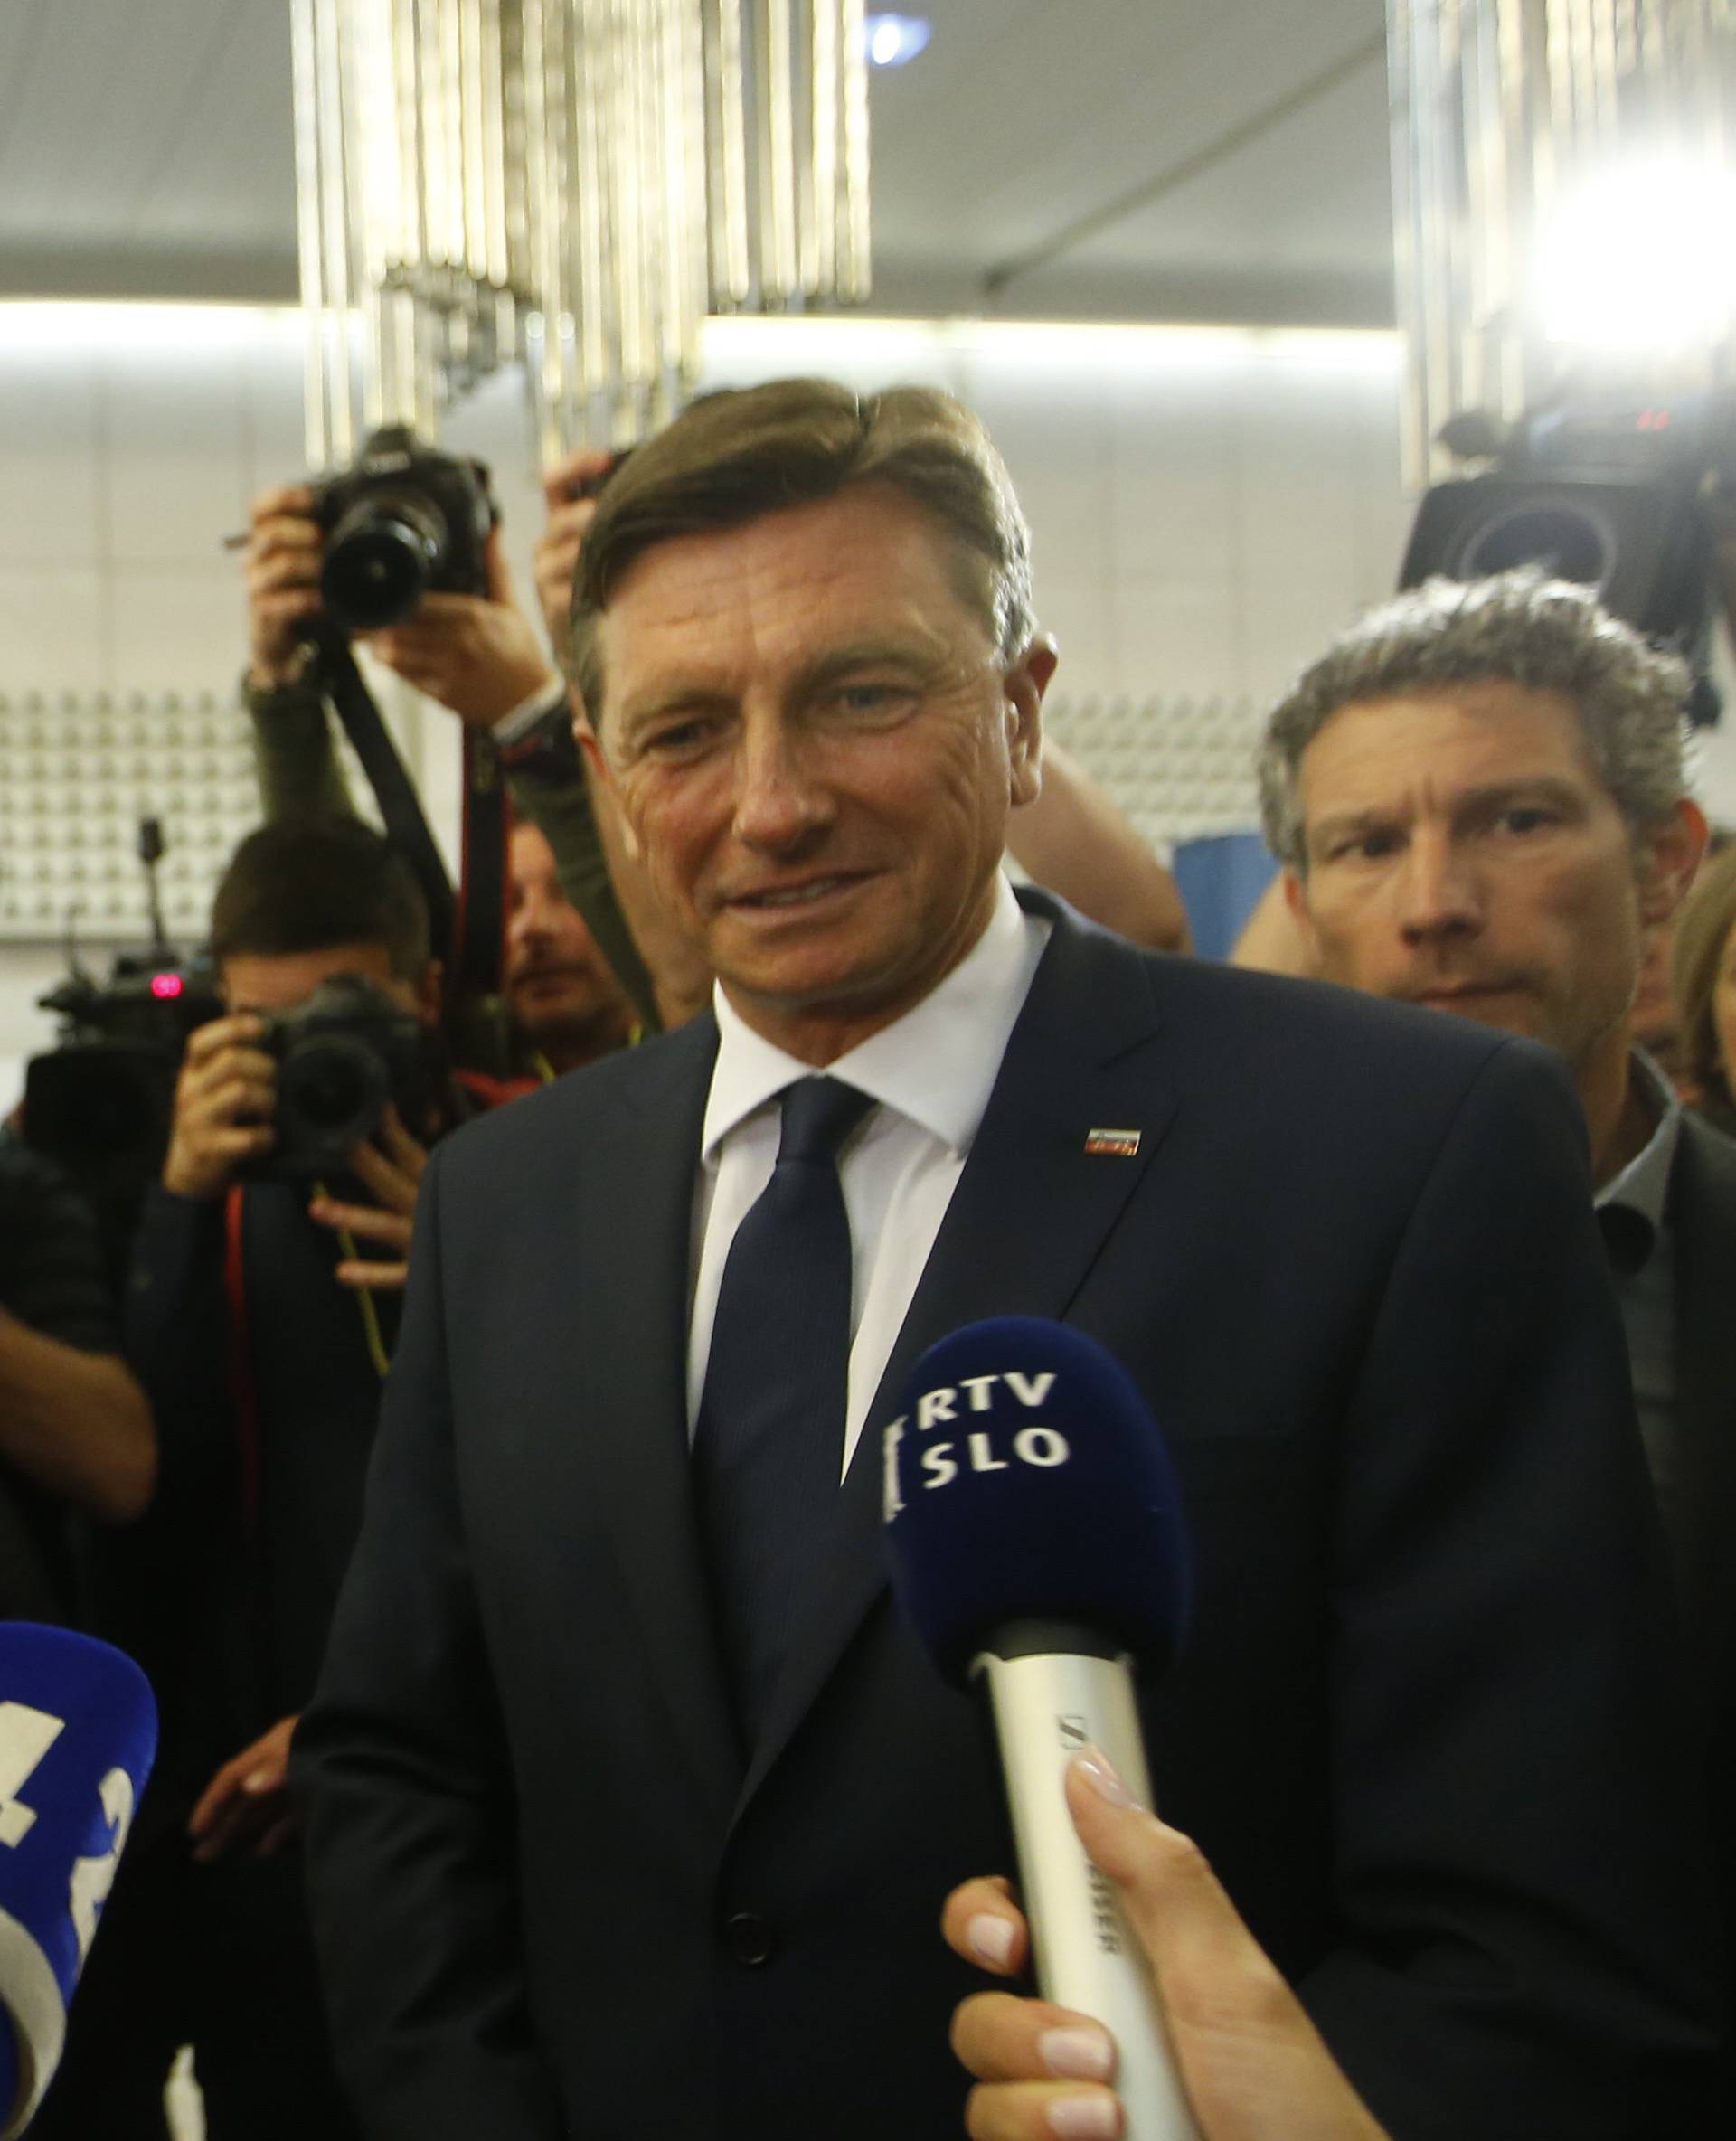 Presidential candidates Borut Pahor and Marjan Sarec answer questions from the media after the first round of the presidential election in Ljubljana